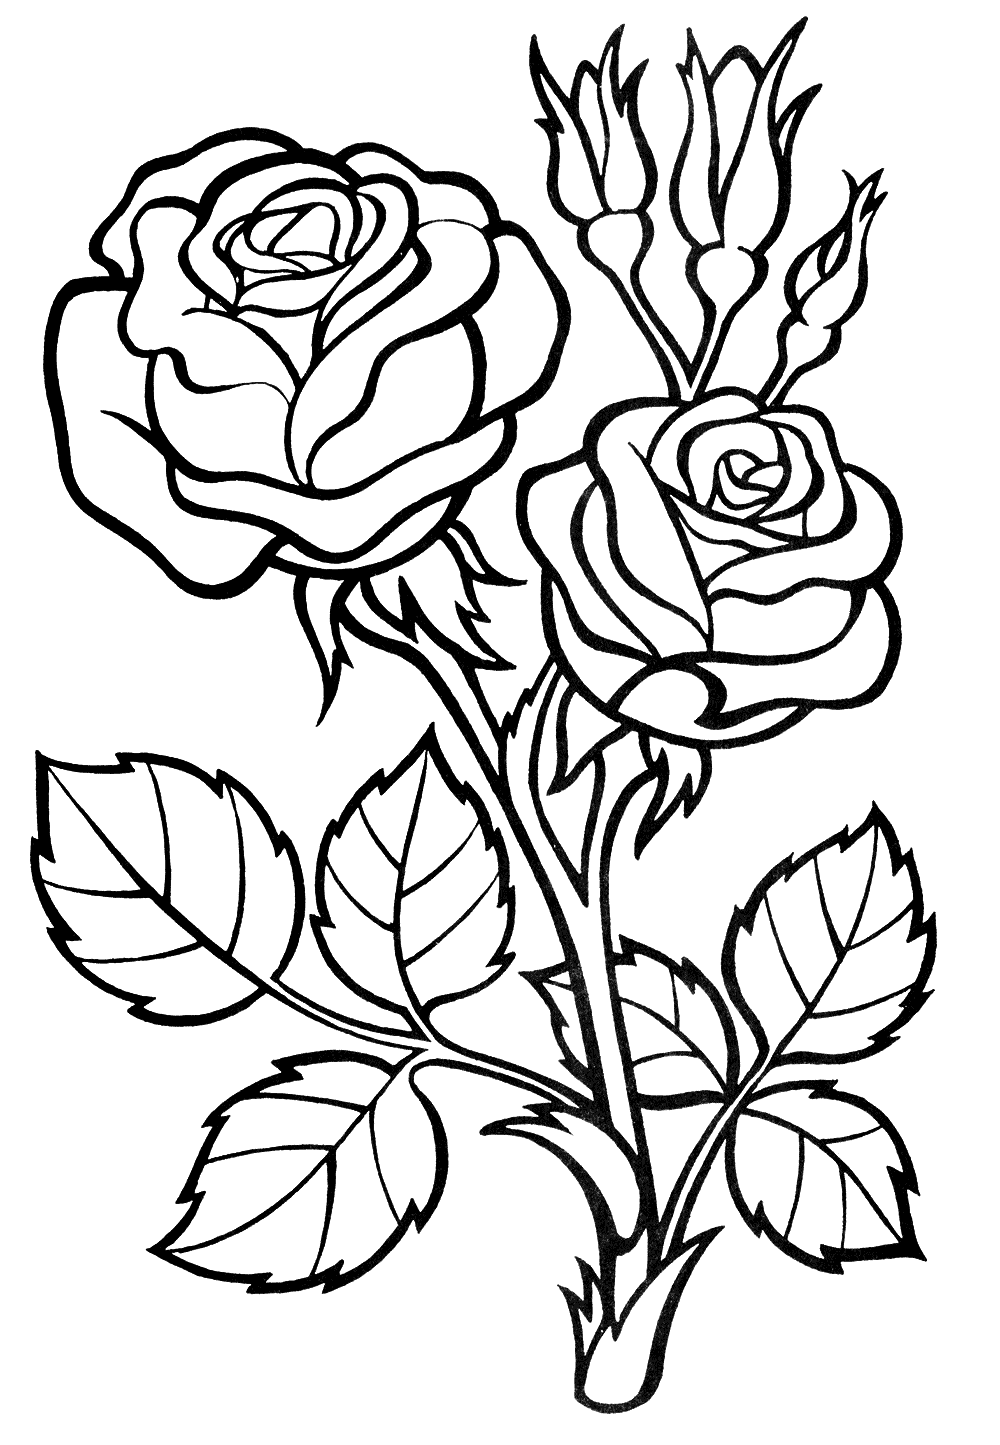 coloring roses roses coloring pages getcoloringpagescom coloring roses 